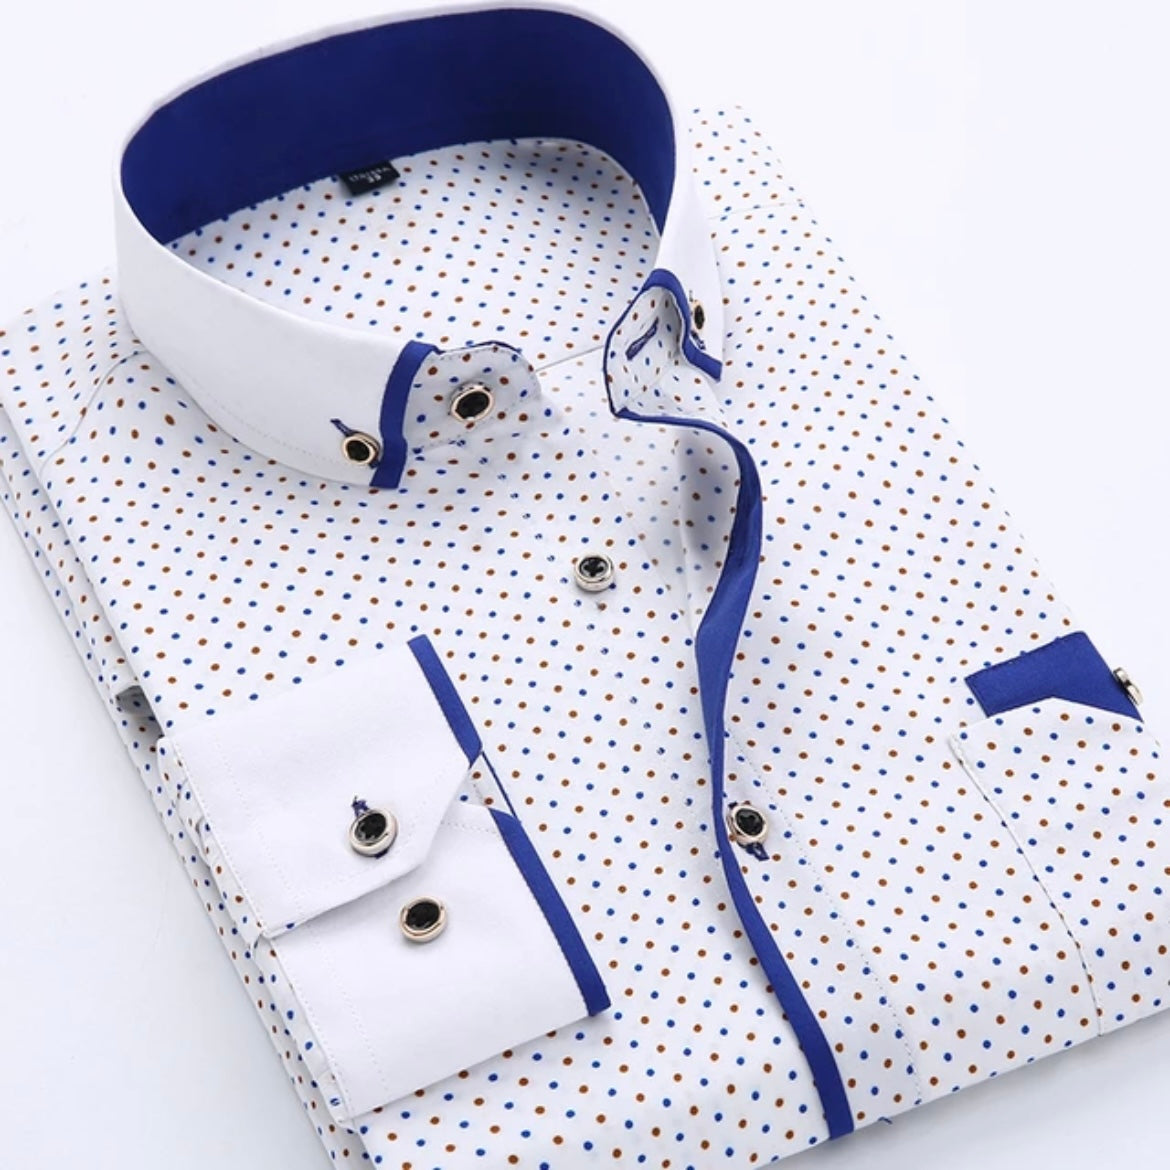 Men’s Button down, Long Sleeved, Floral Shirts - Slim Fit, Light, Comfy; Size - Large; Free Delivery